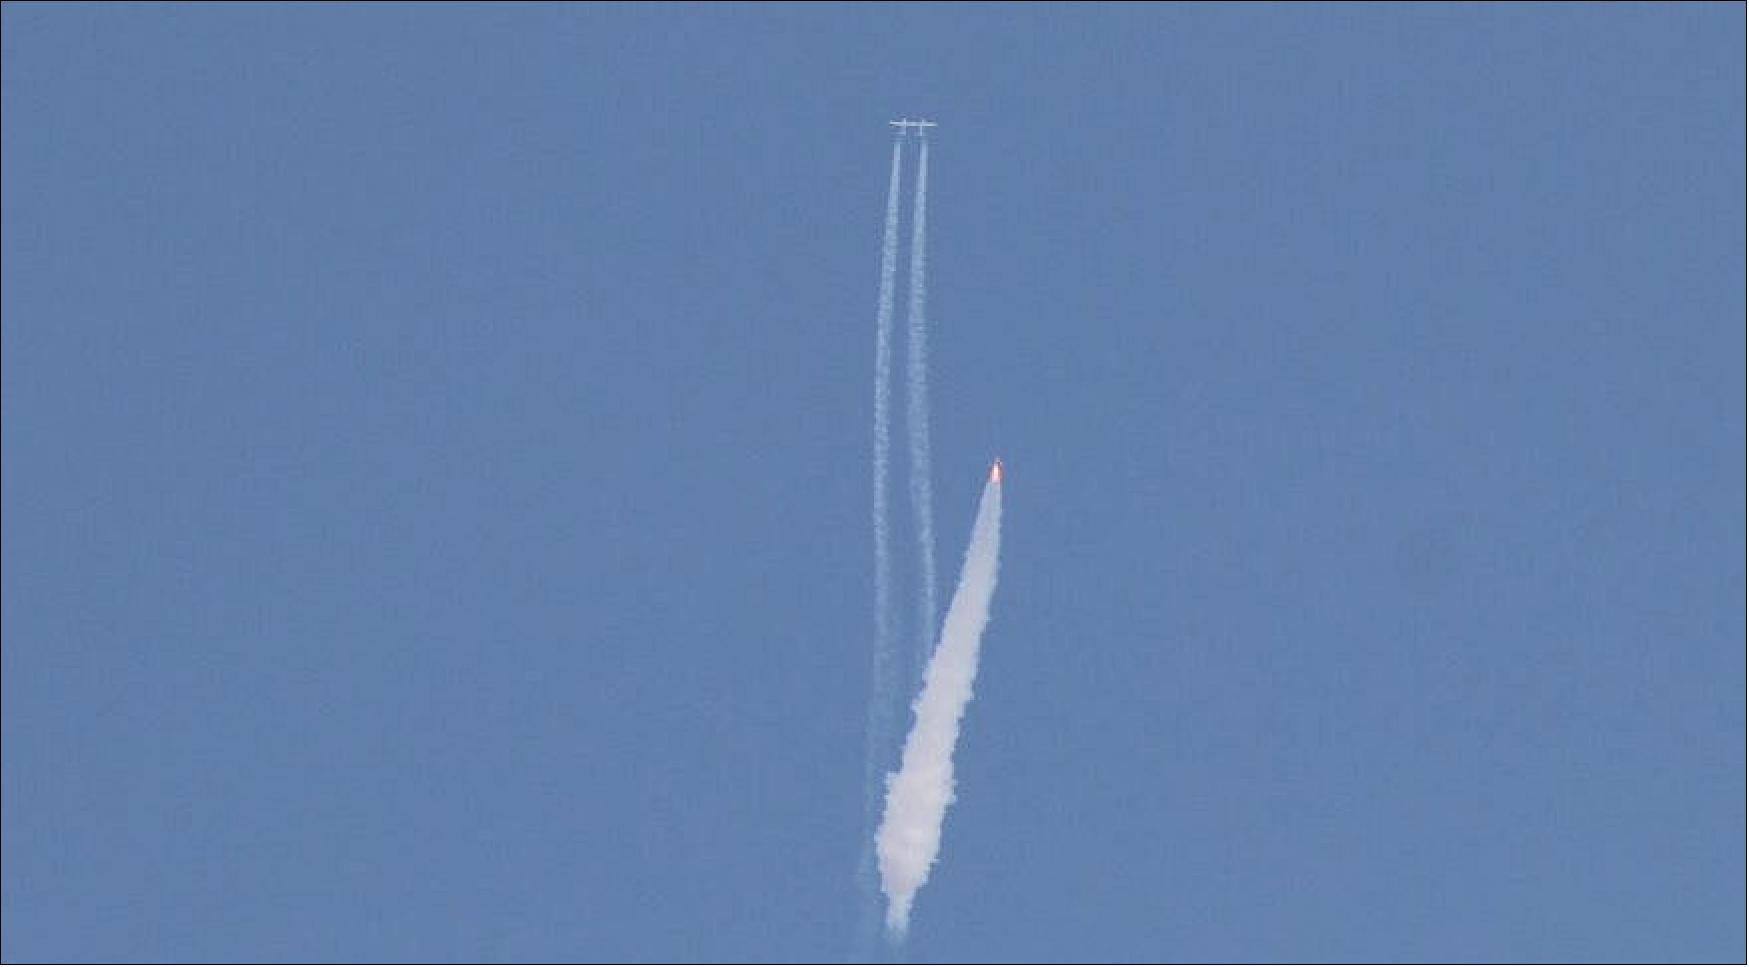 Figure 14: SpaceShipTwo ignites its rocket motor seconds after release from its WhiteKnightTwo carrier aircraft July 11 from Spaceport America, New Mexico (image credit: SpaceNews/Jeff Foust)